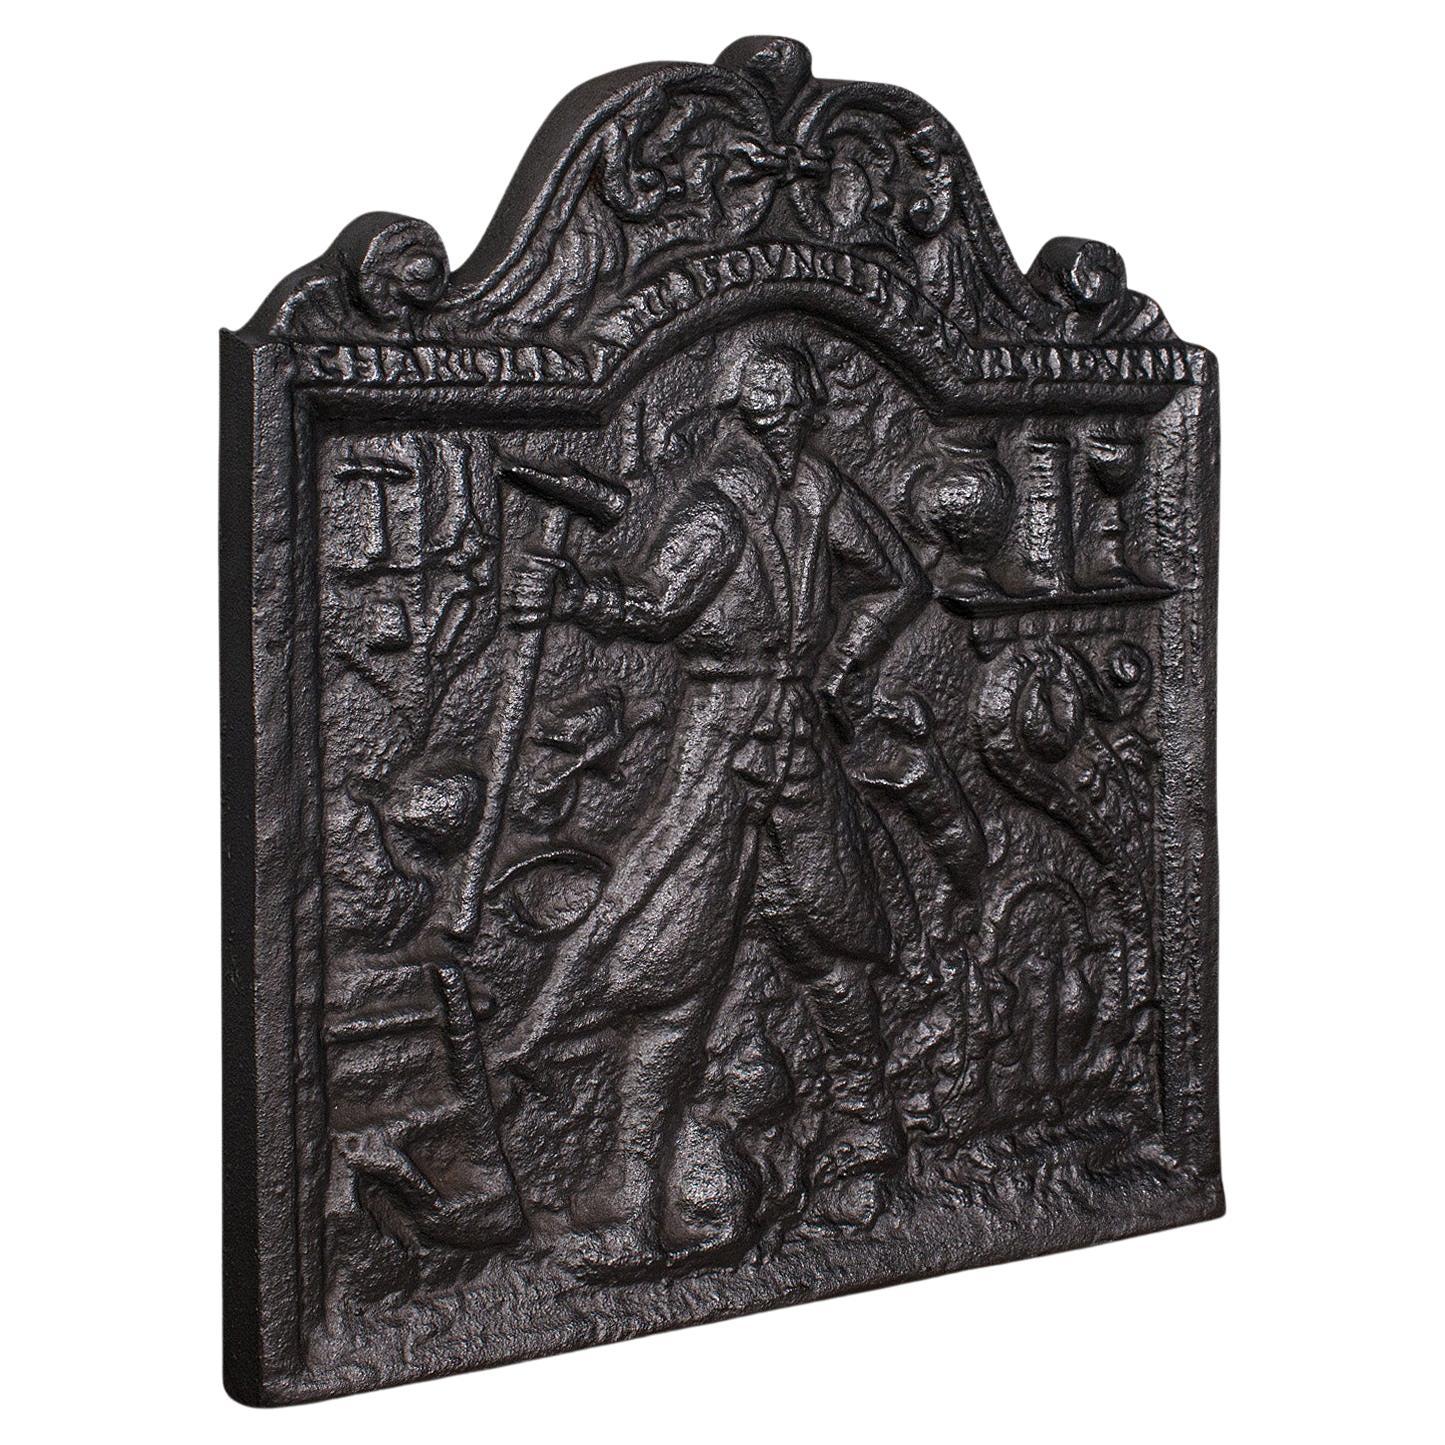 Antique Relief Fire Back, English, Cast Iron, Decorative, Fireplace, Victorian